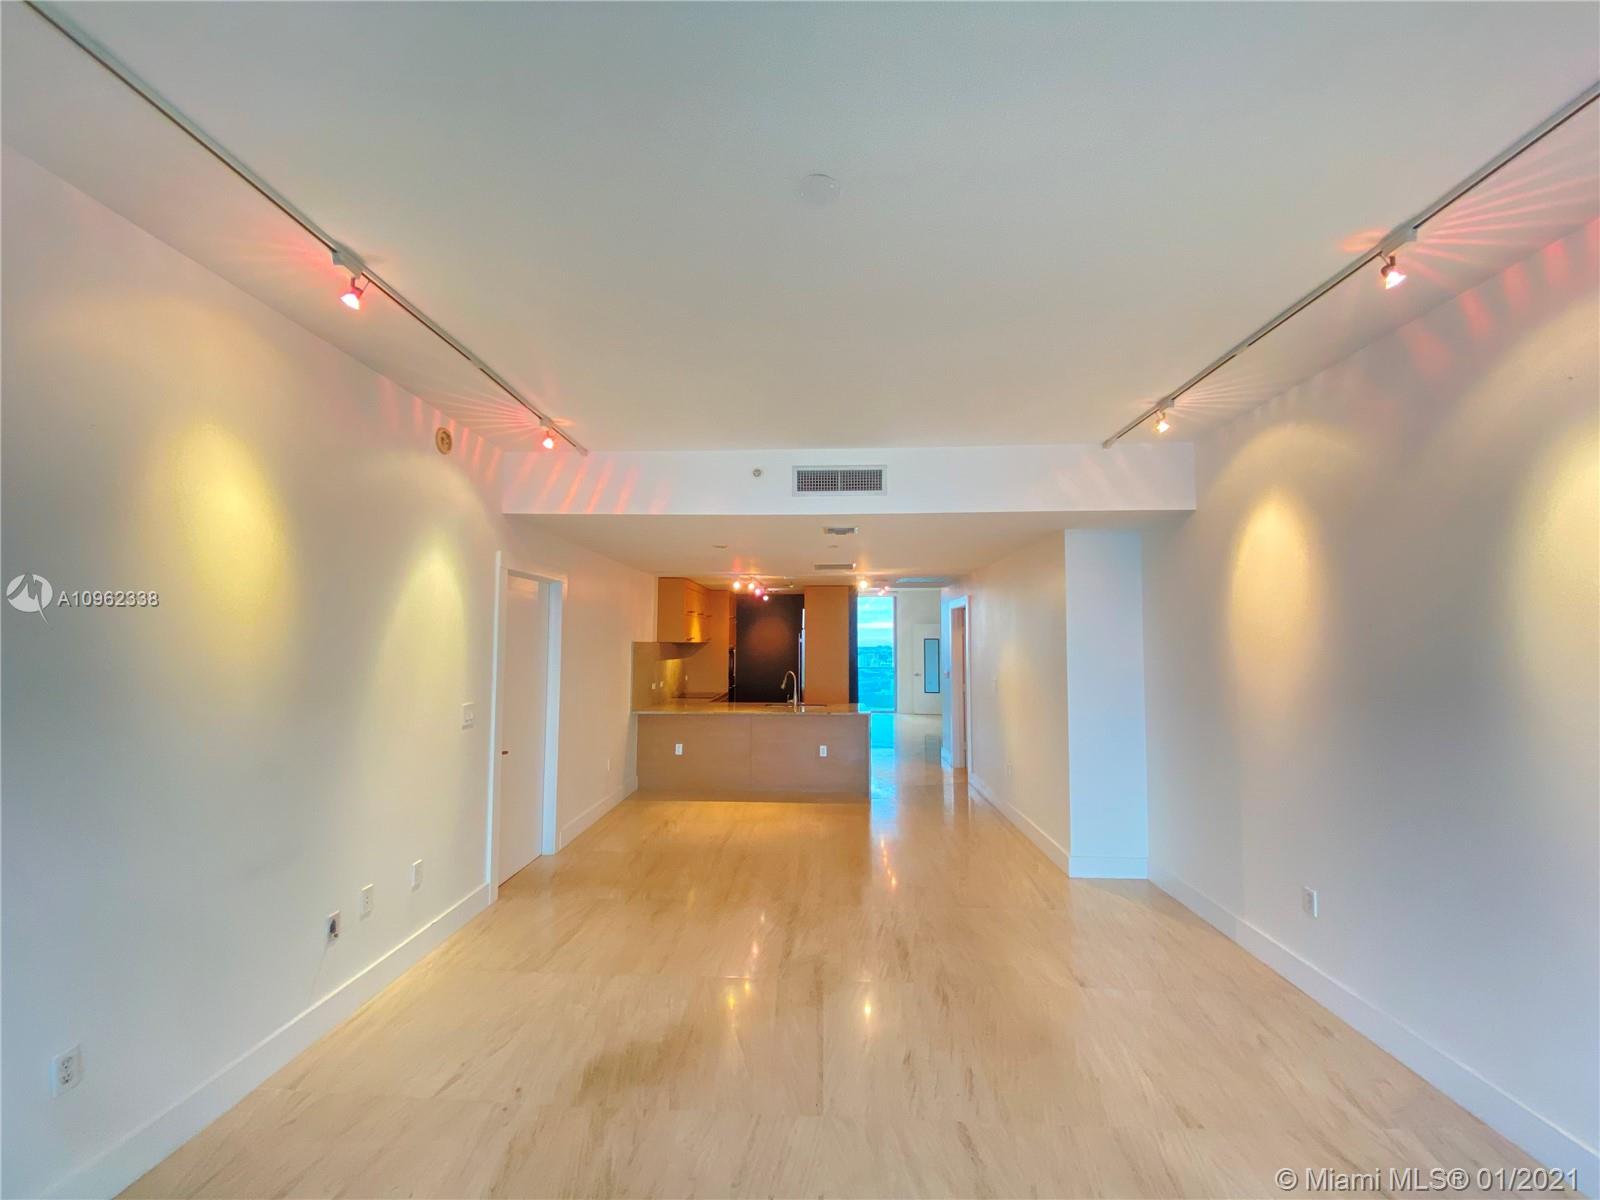 Photo 2 of 900 Biscayne Bay Apt 3402 in Miami - MLS A10962338